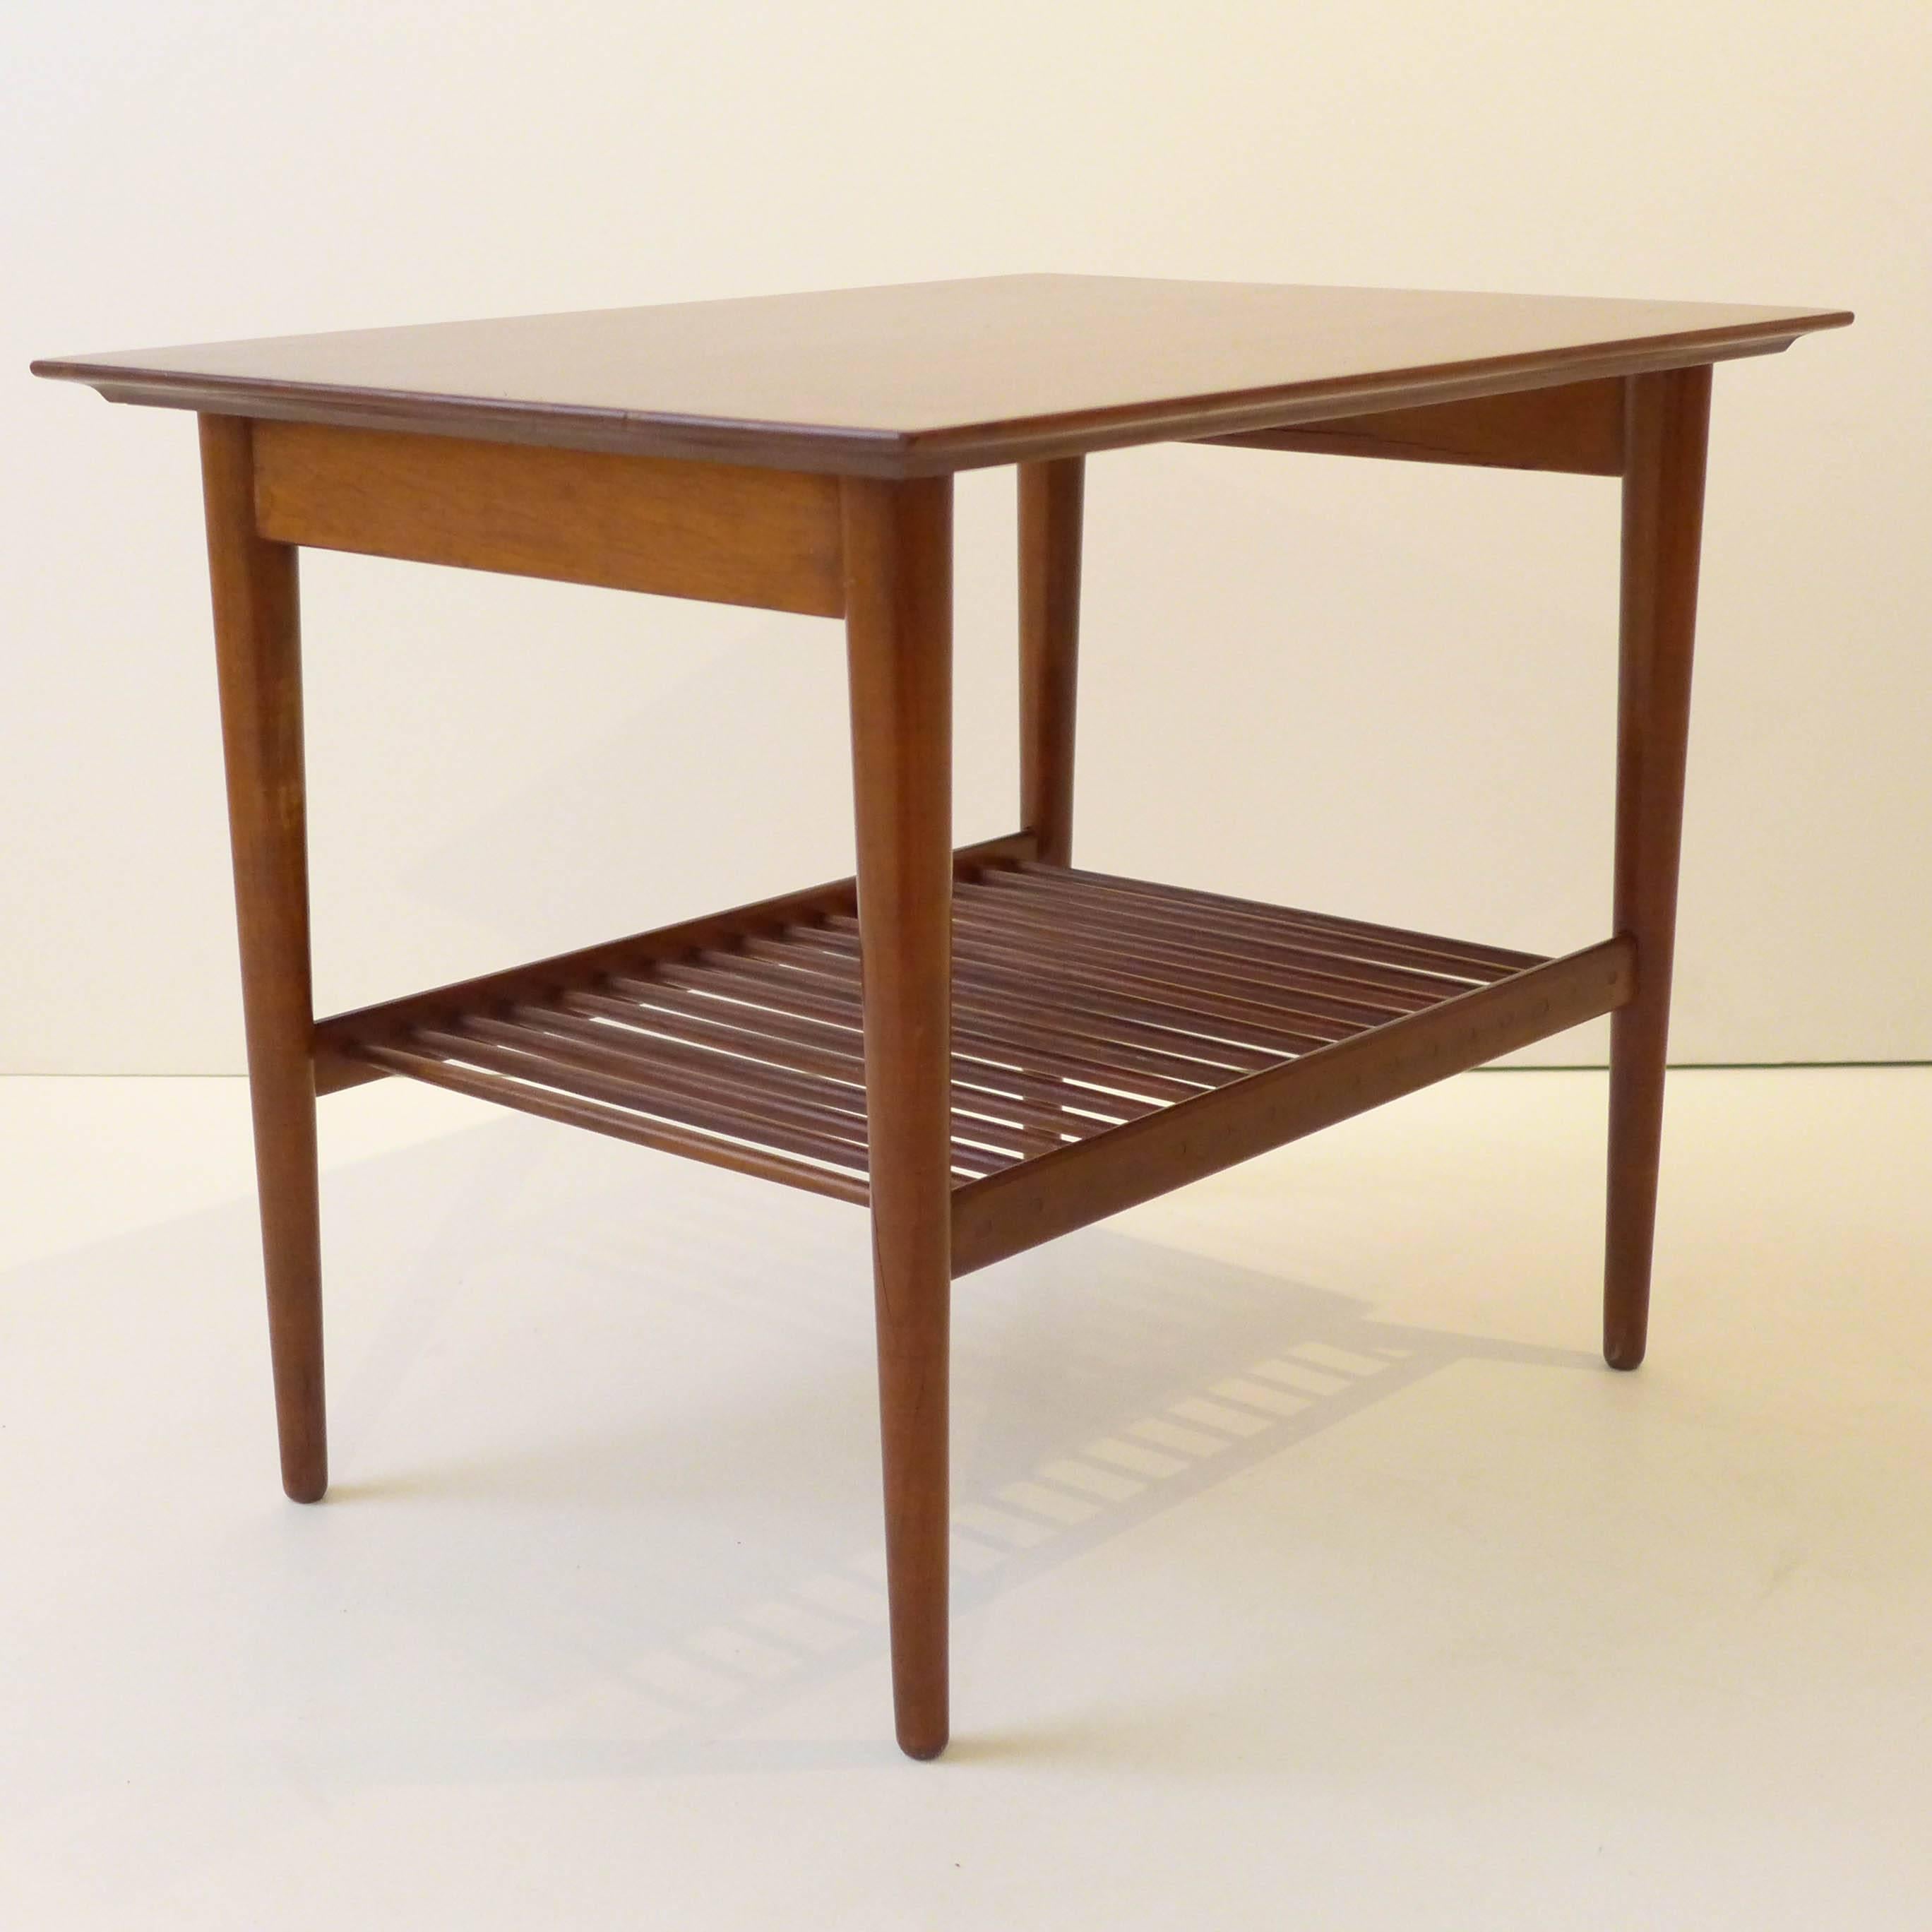 Walnut side table with tapering legs and an open medial shelf consisting of a series of dowels. Nice details throughout. Designed by Kipp Stewart and Stewart MacDougall as part of their American Design Foundation line and produced by both Calvin and